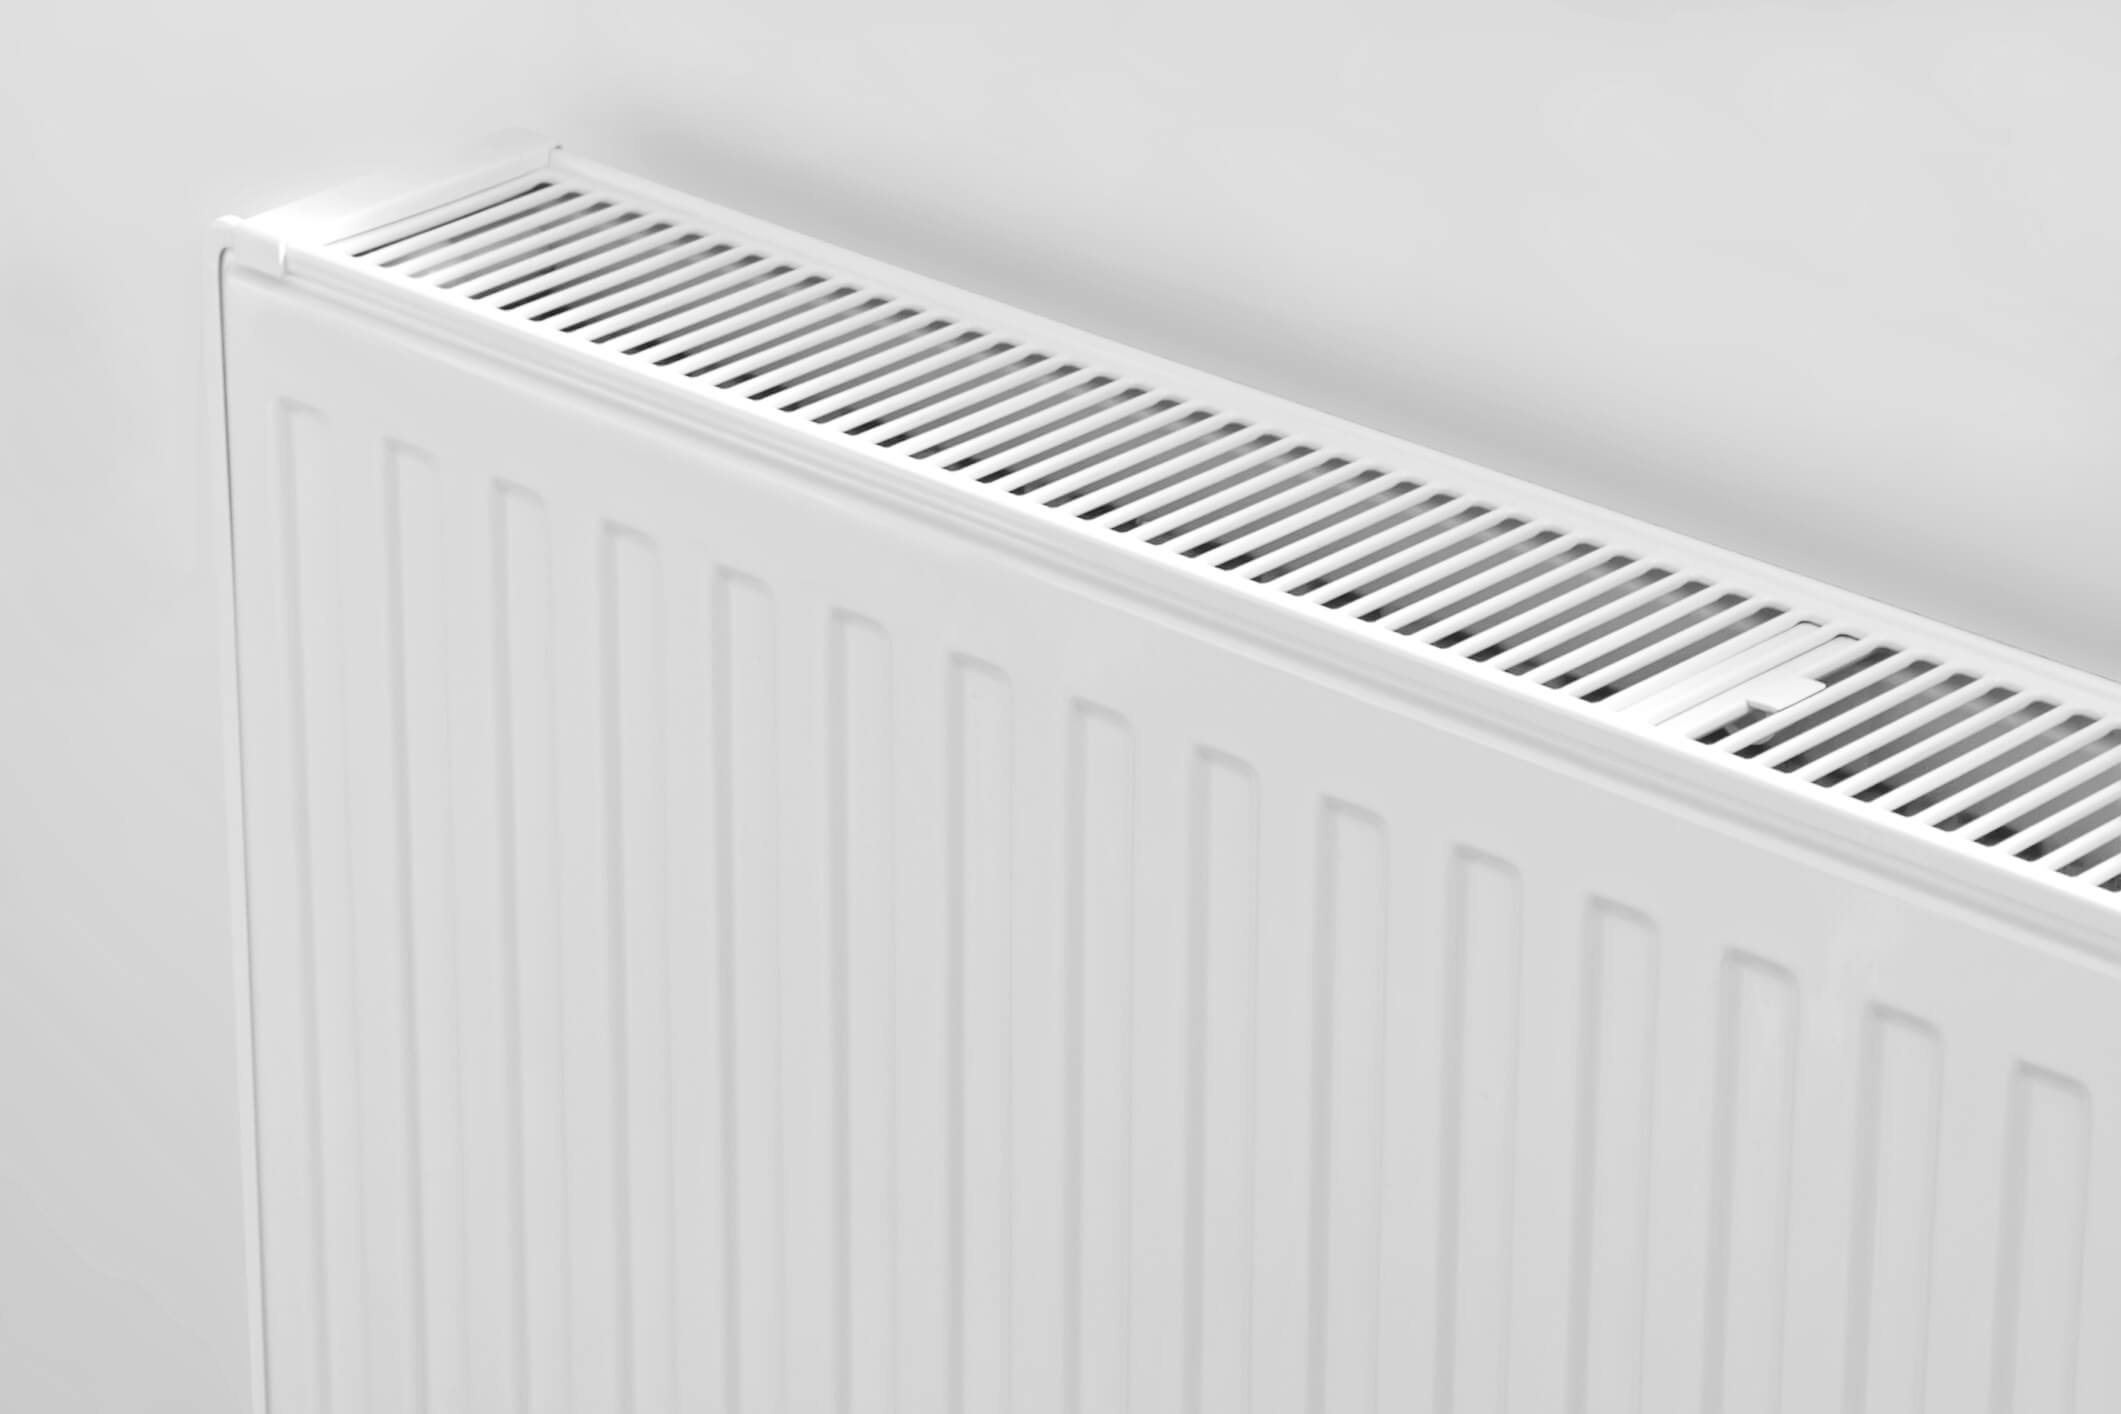 Picture of a modern, newly fitted radiator